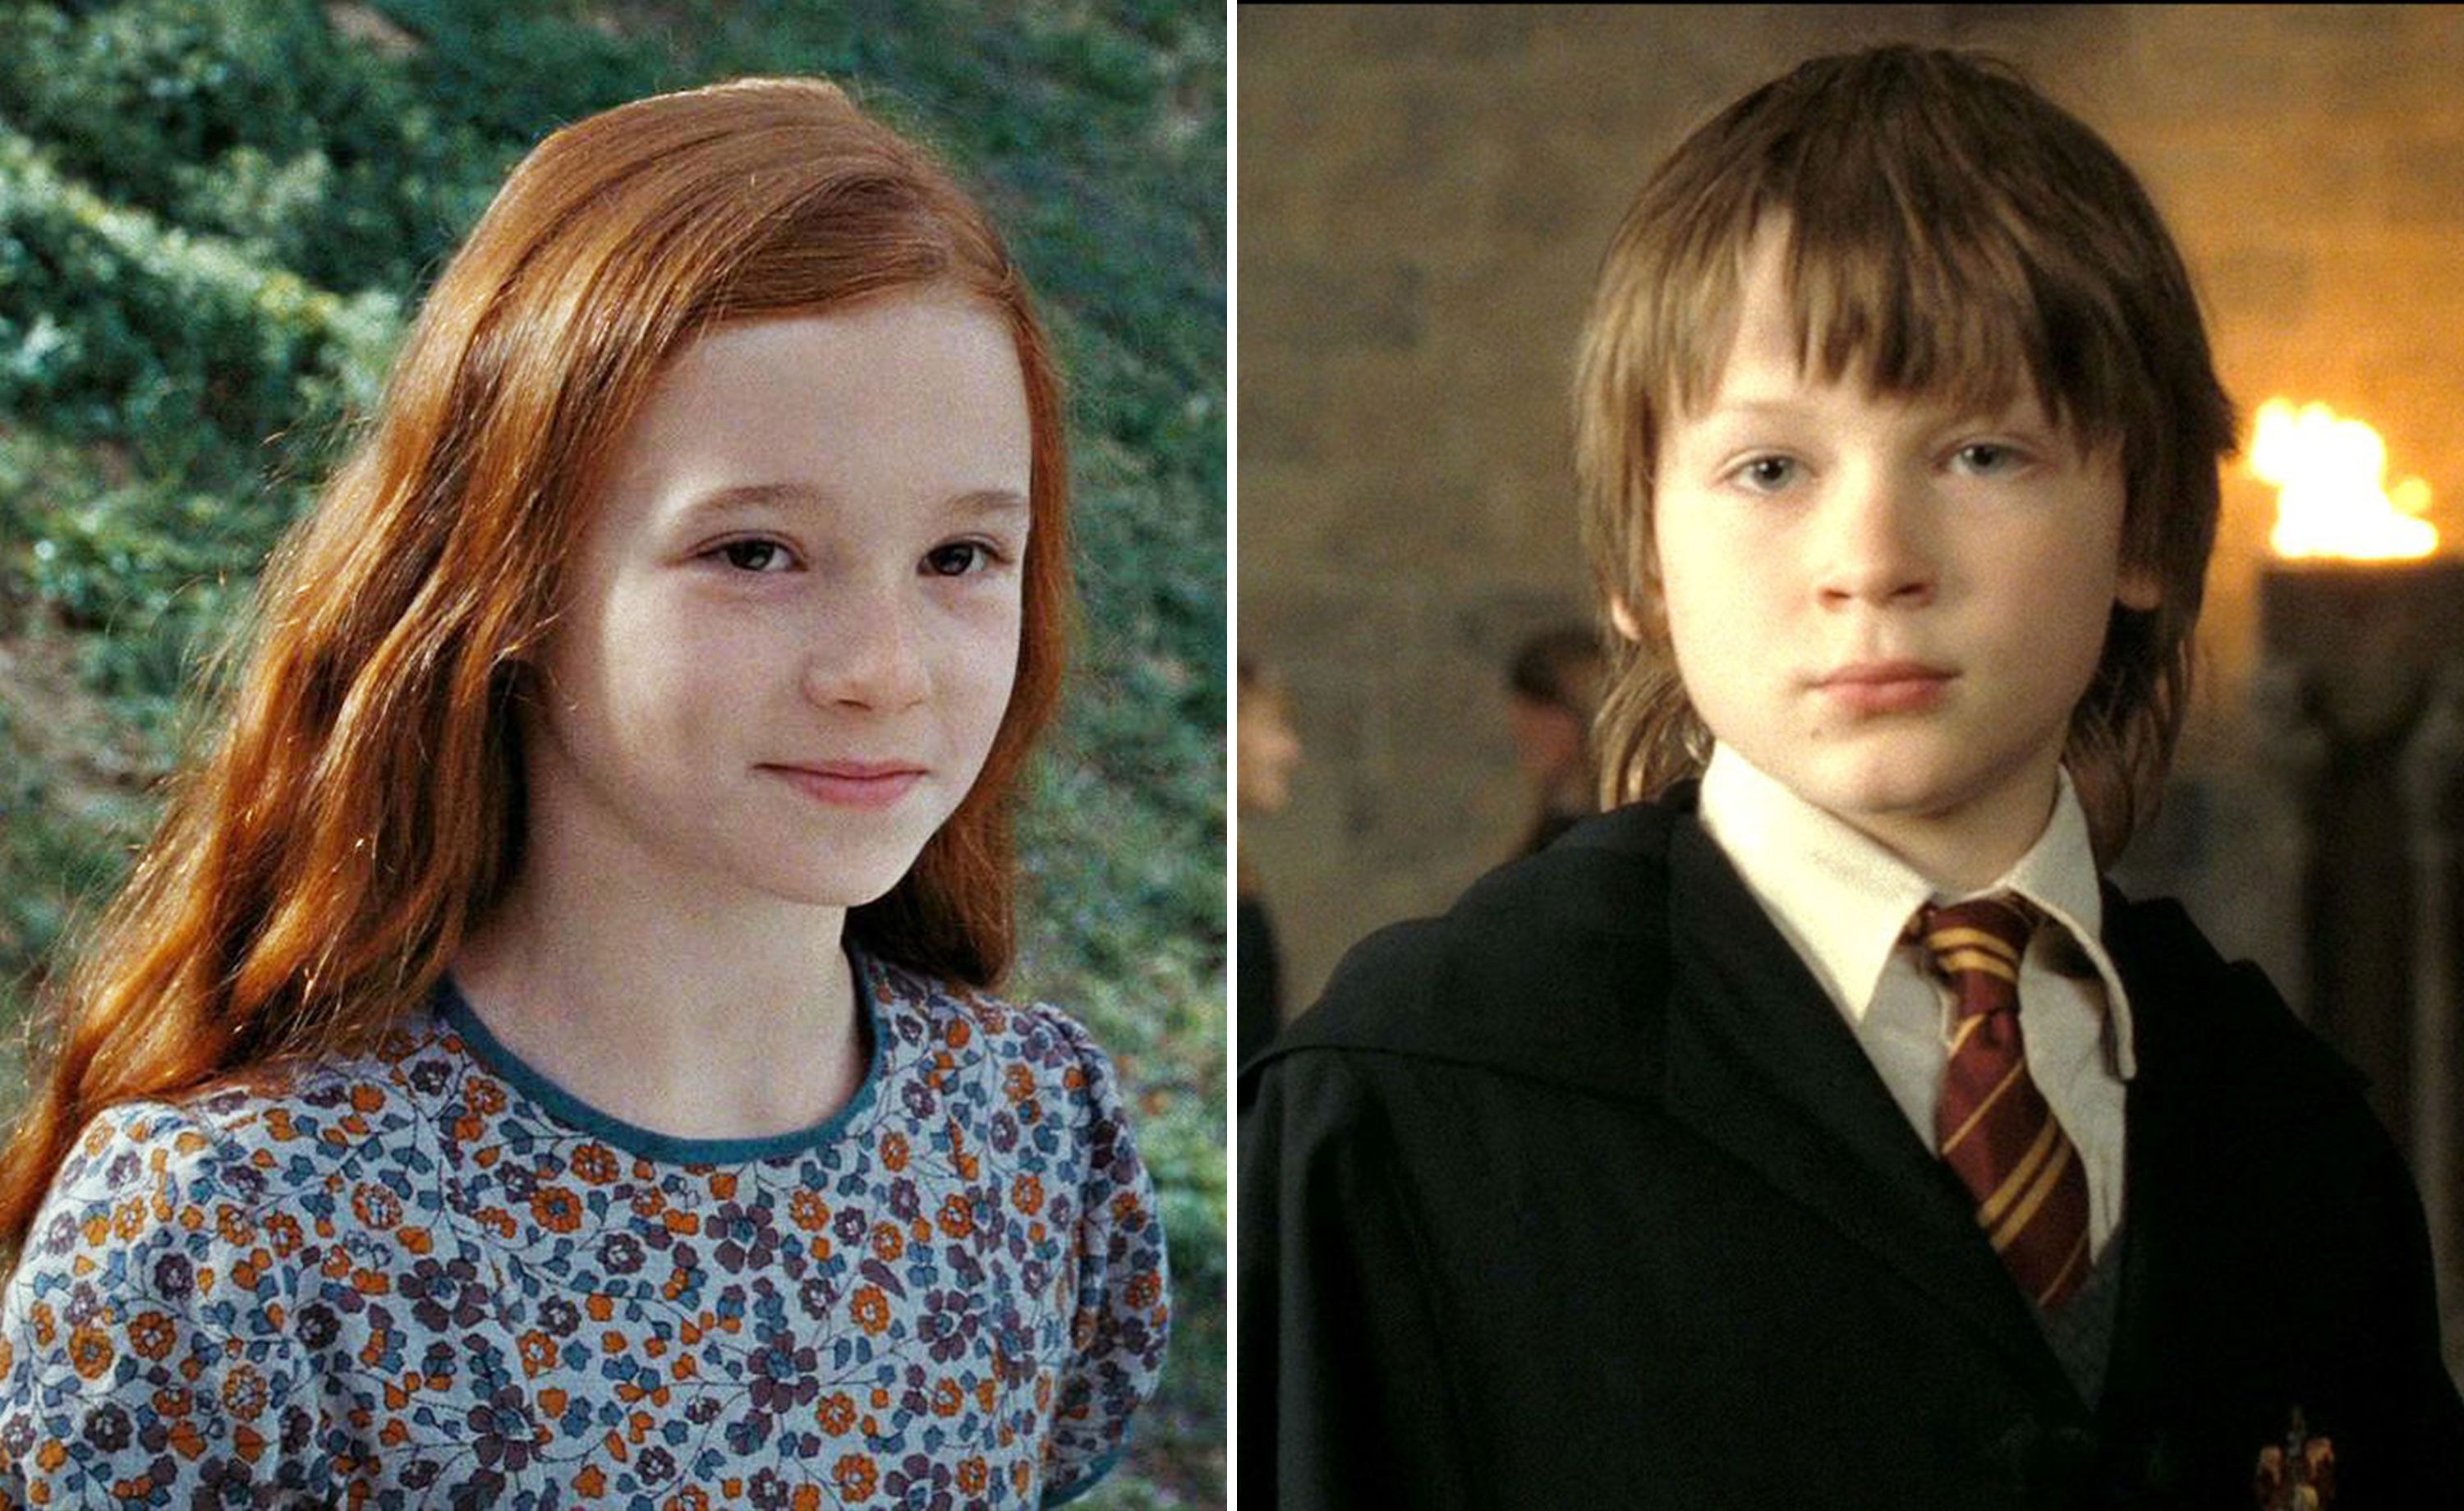 6. "Always" with a small Lily and James Potter's glasses and scar - wide 5